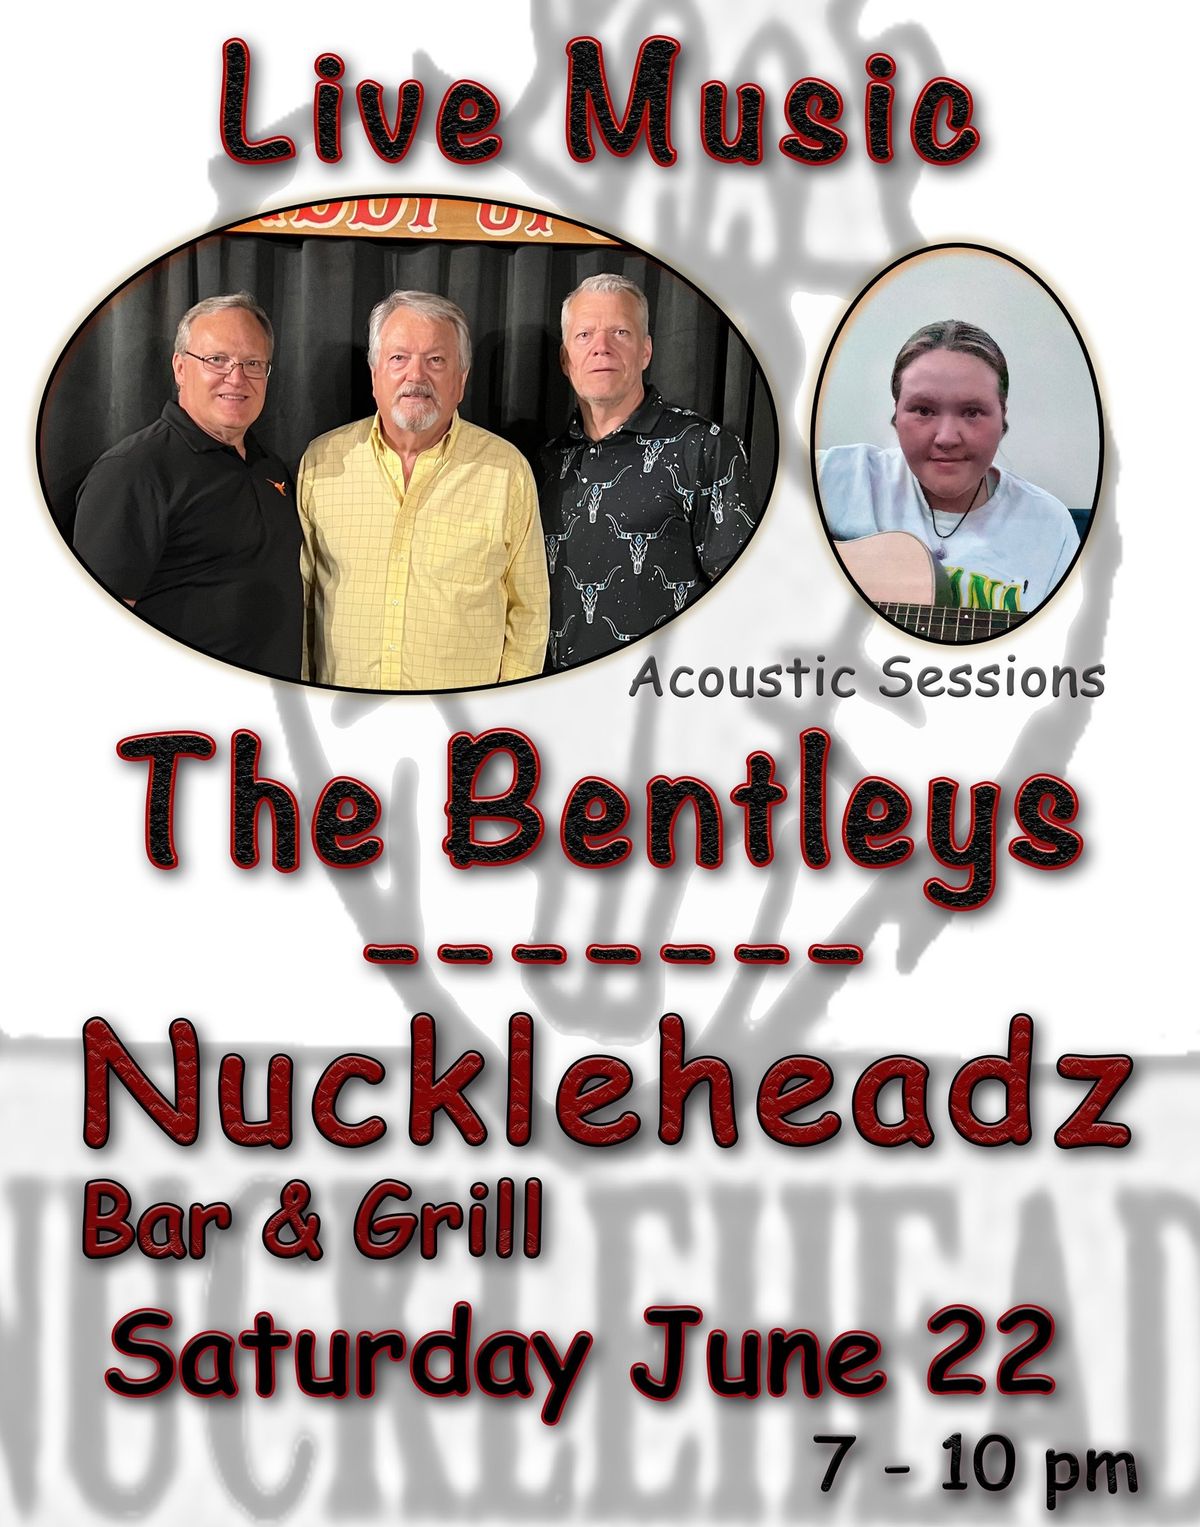 LIVE MUSIC featuring THE BENTLEYS!